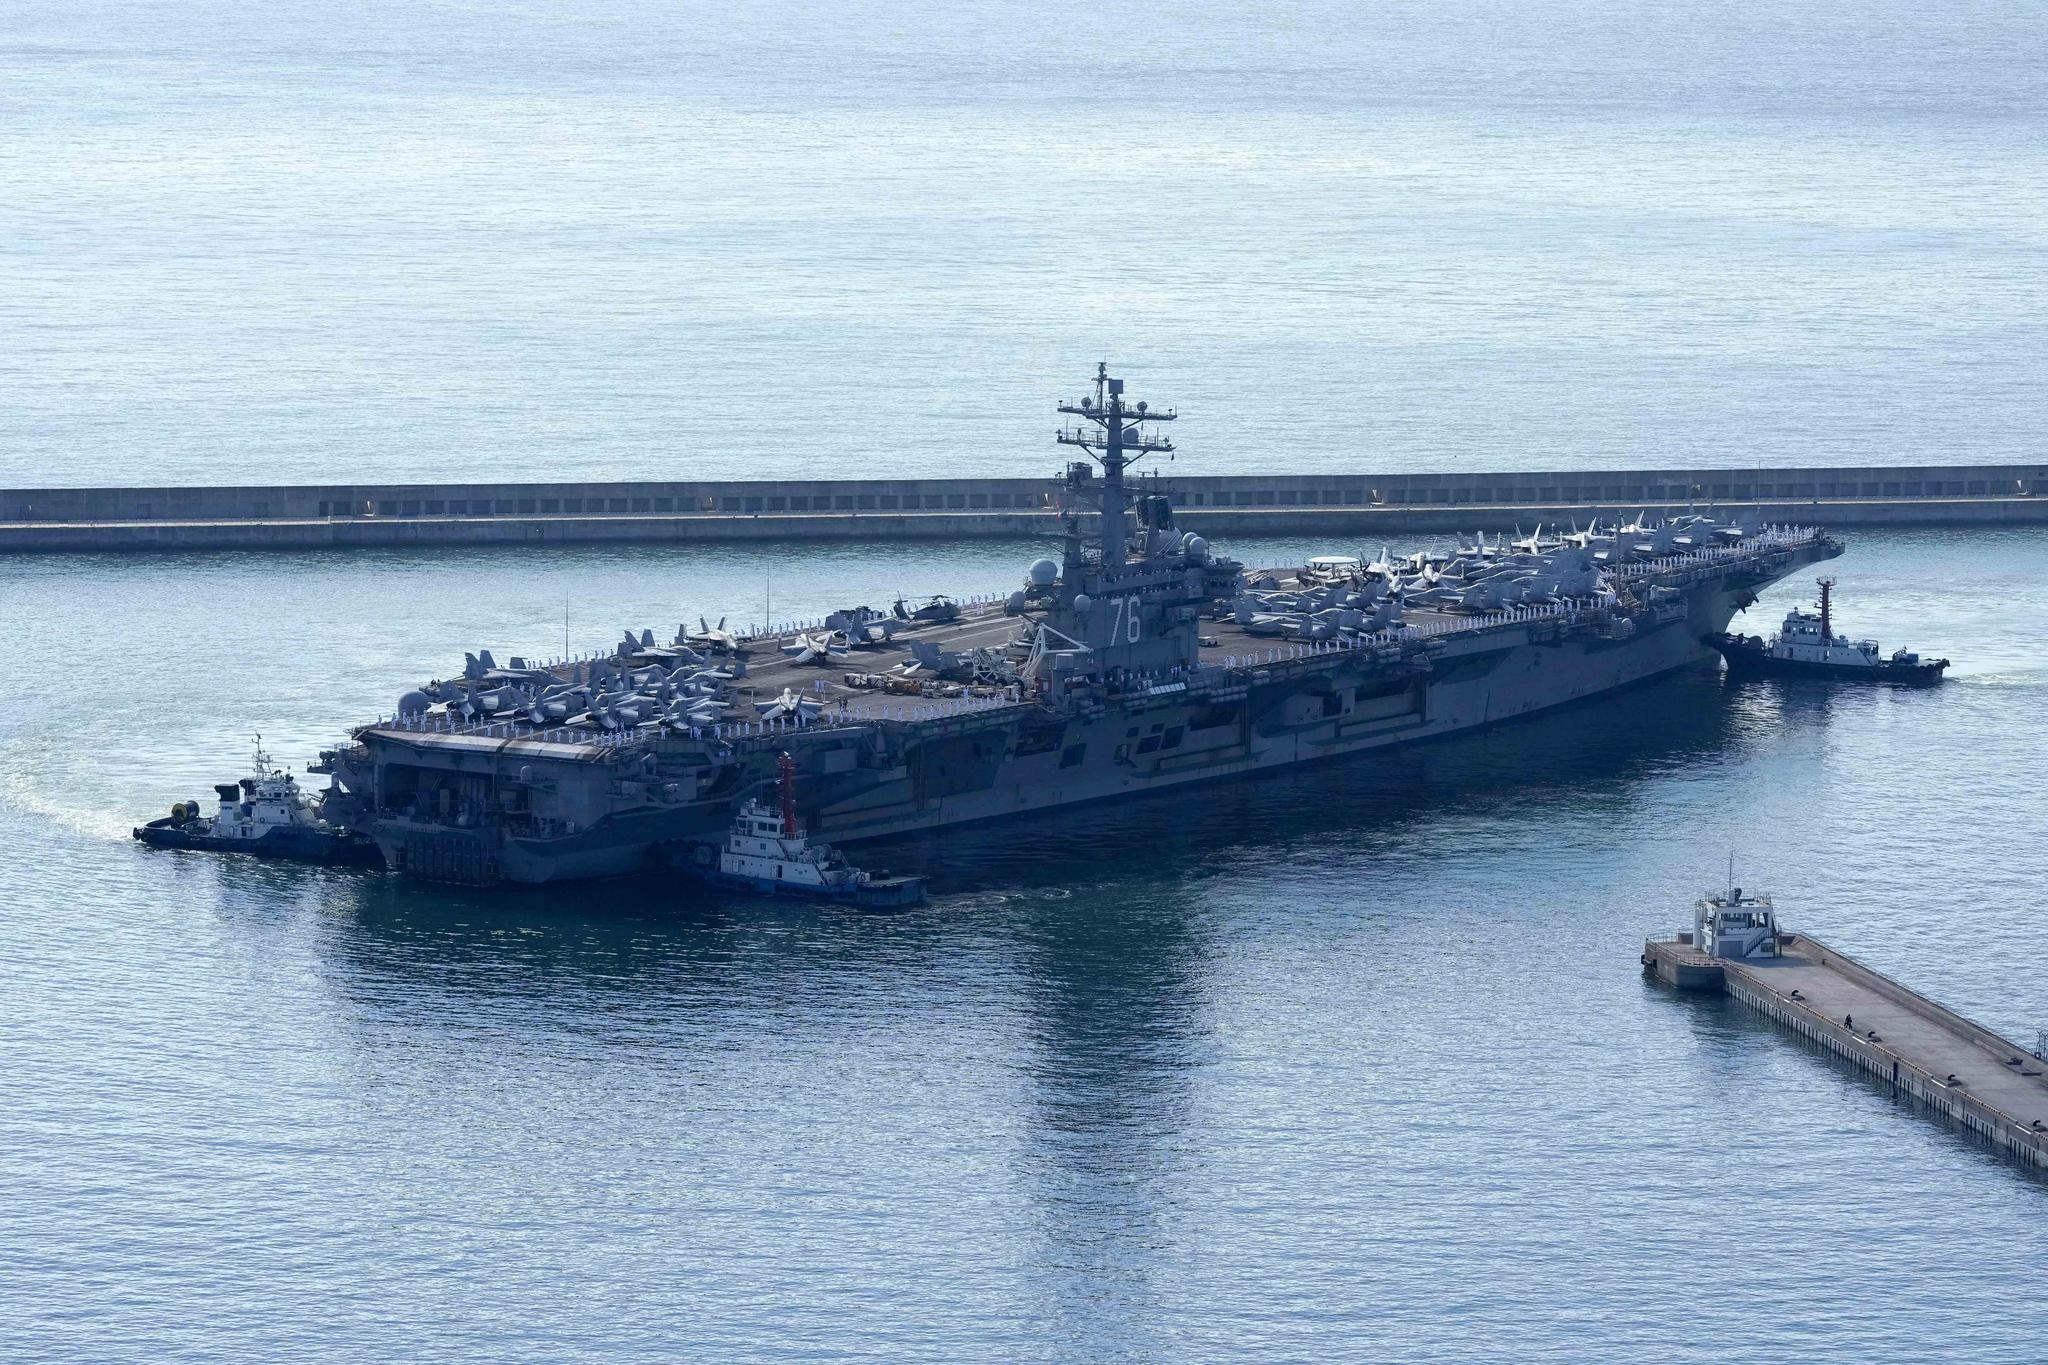 The U.S. carrier USS Ronald Reagan is escorted as it arrives in Busan, South Korea on Sept. 23, 2022. North Korea warned Saturday, Oct. 8